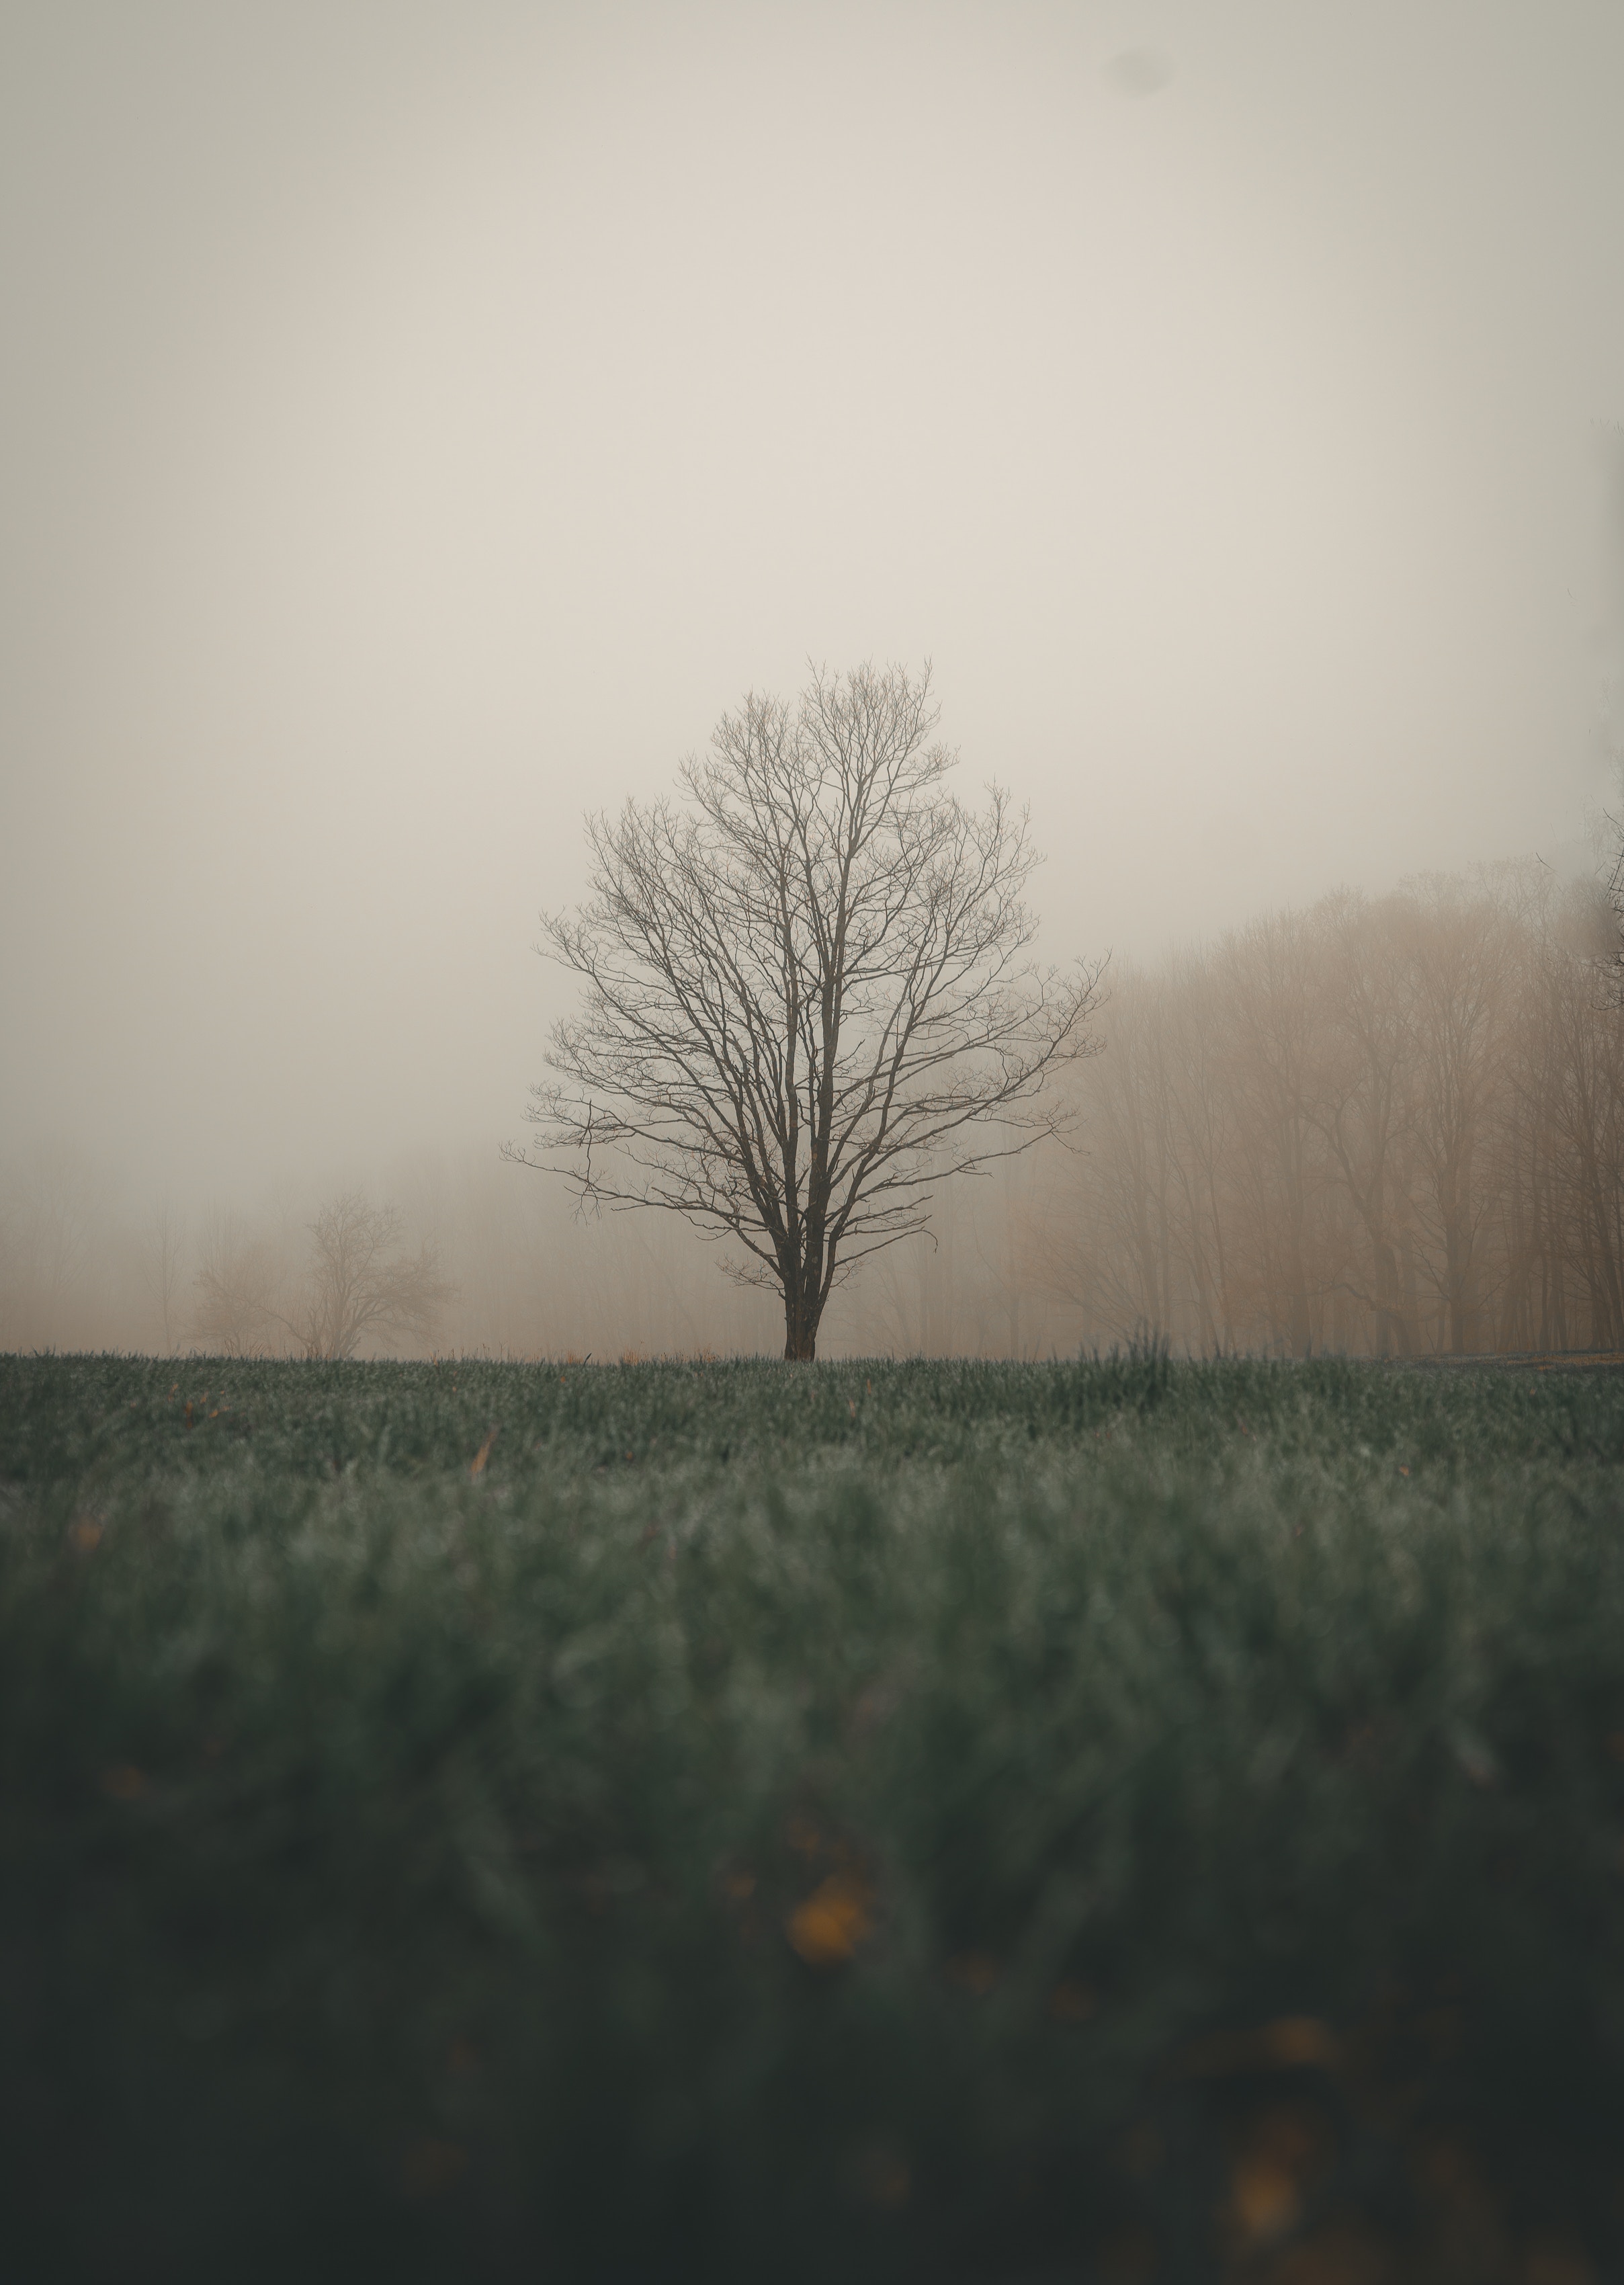 81987 download wallpaper landscape, nature, grass, autumn, wood, tree, fog screensavers and pictures for free